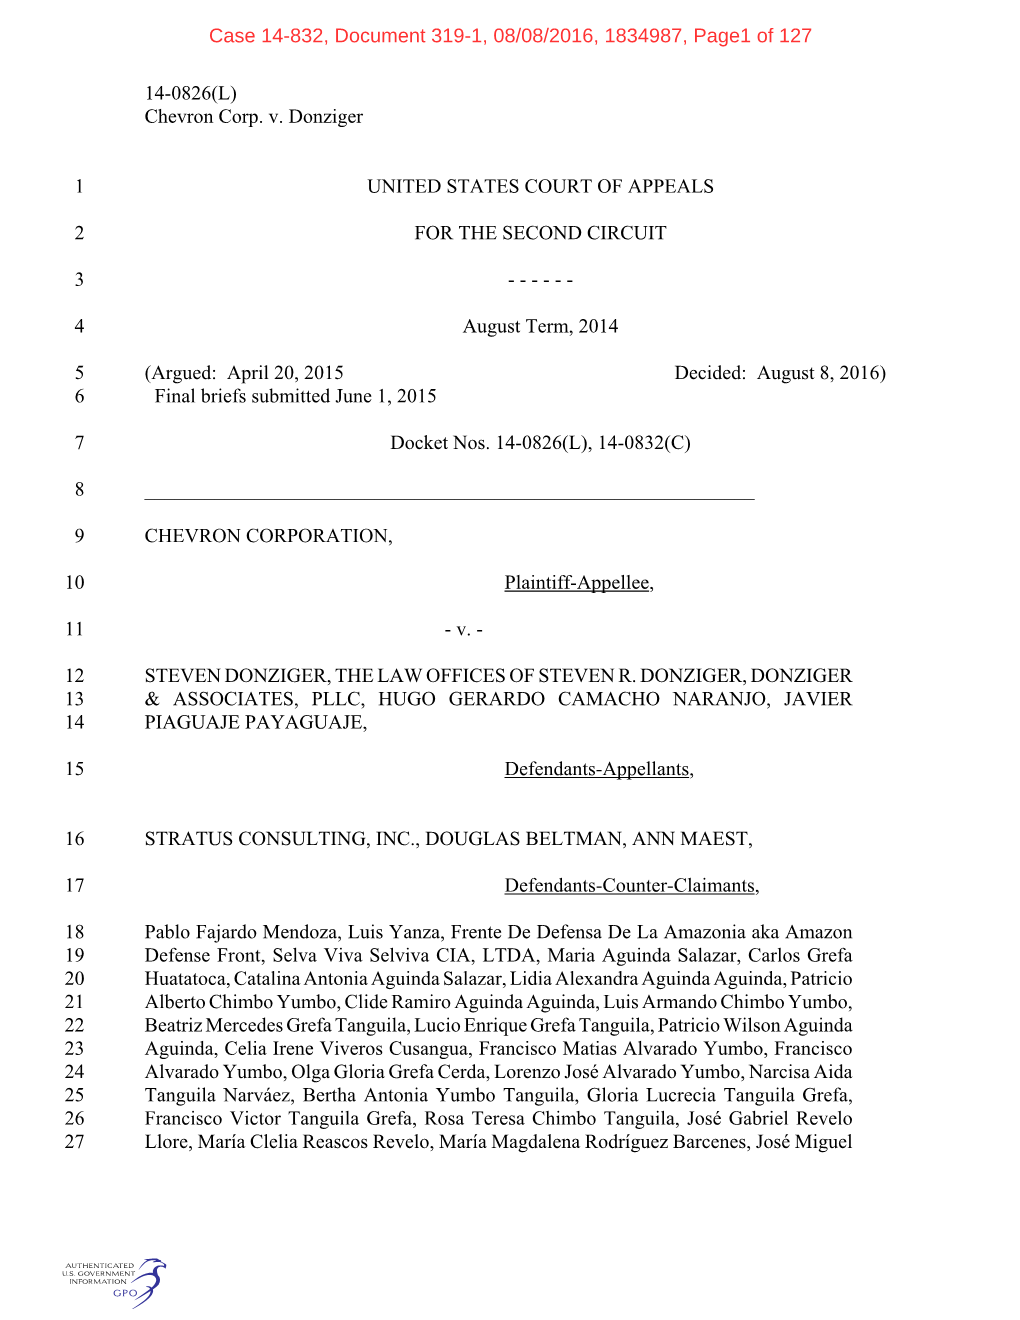 14-0826(L) Chevron Corp. V. Donziger UNITED STATES COURT OF